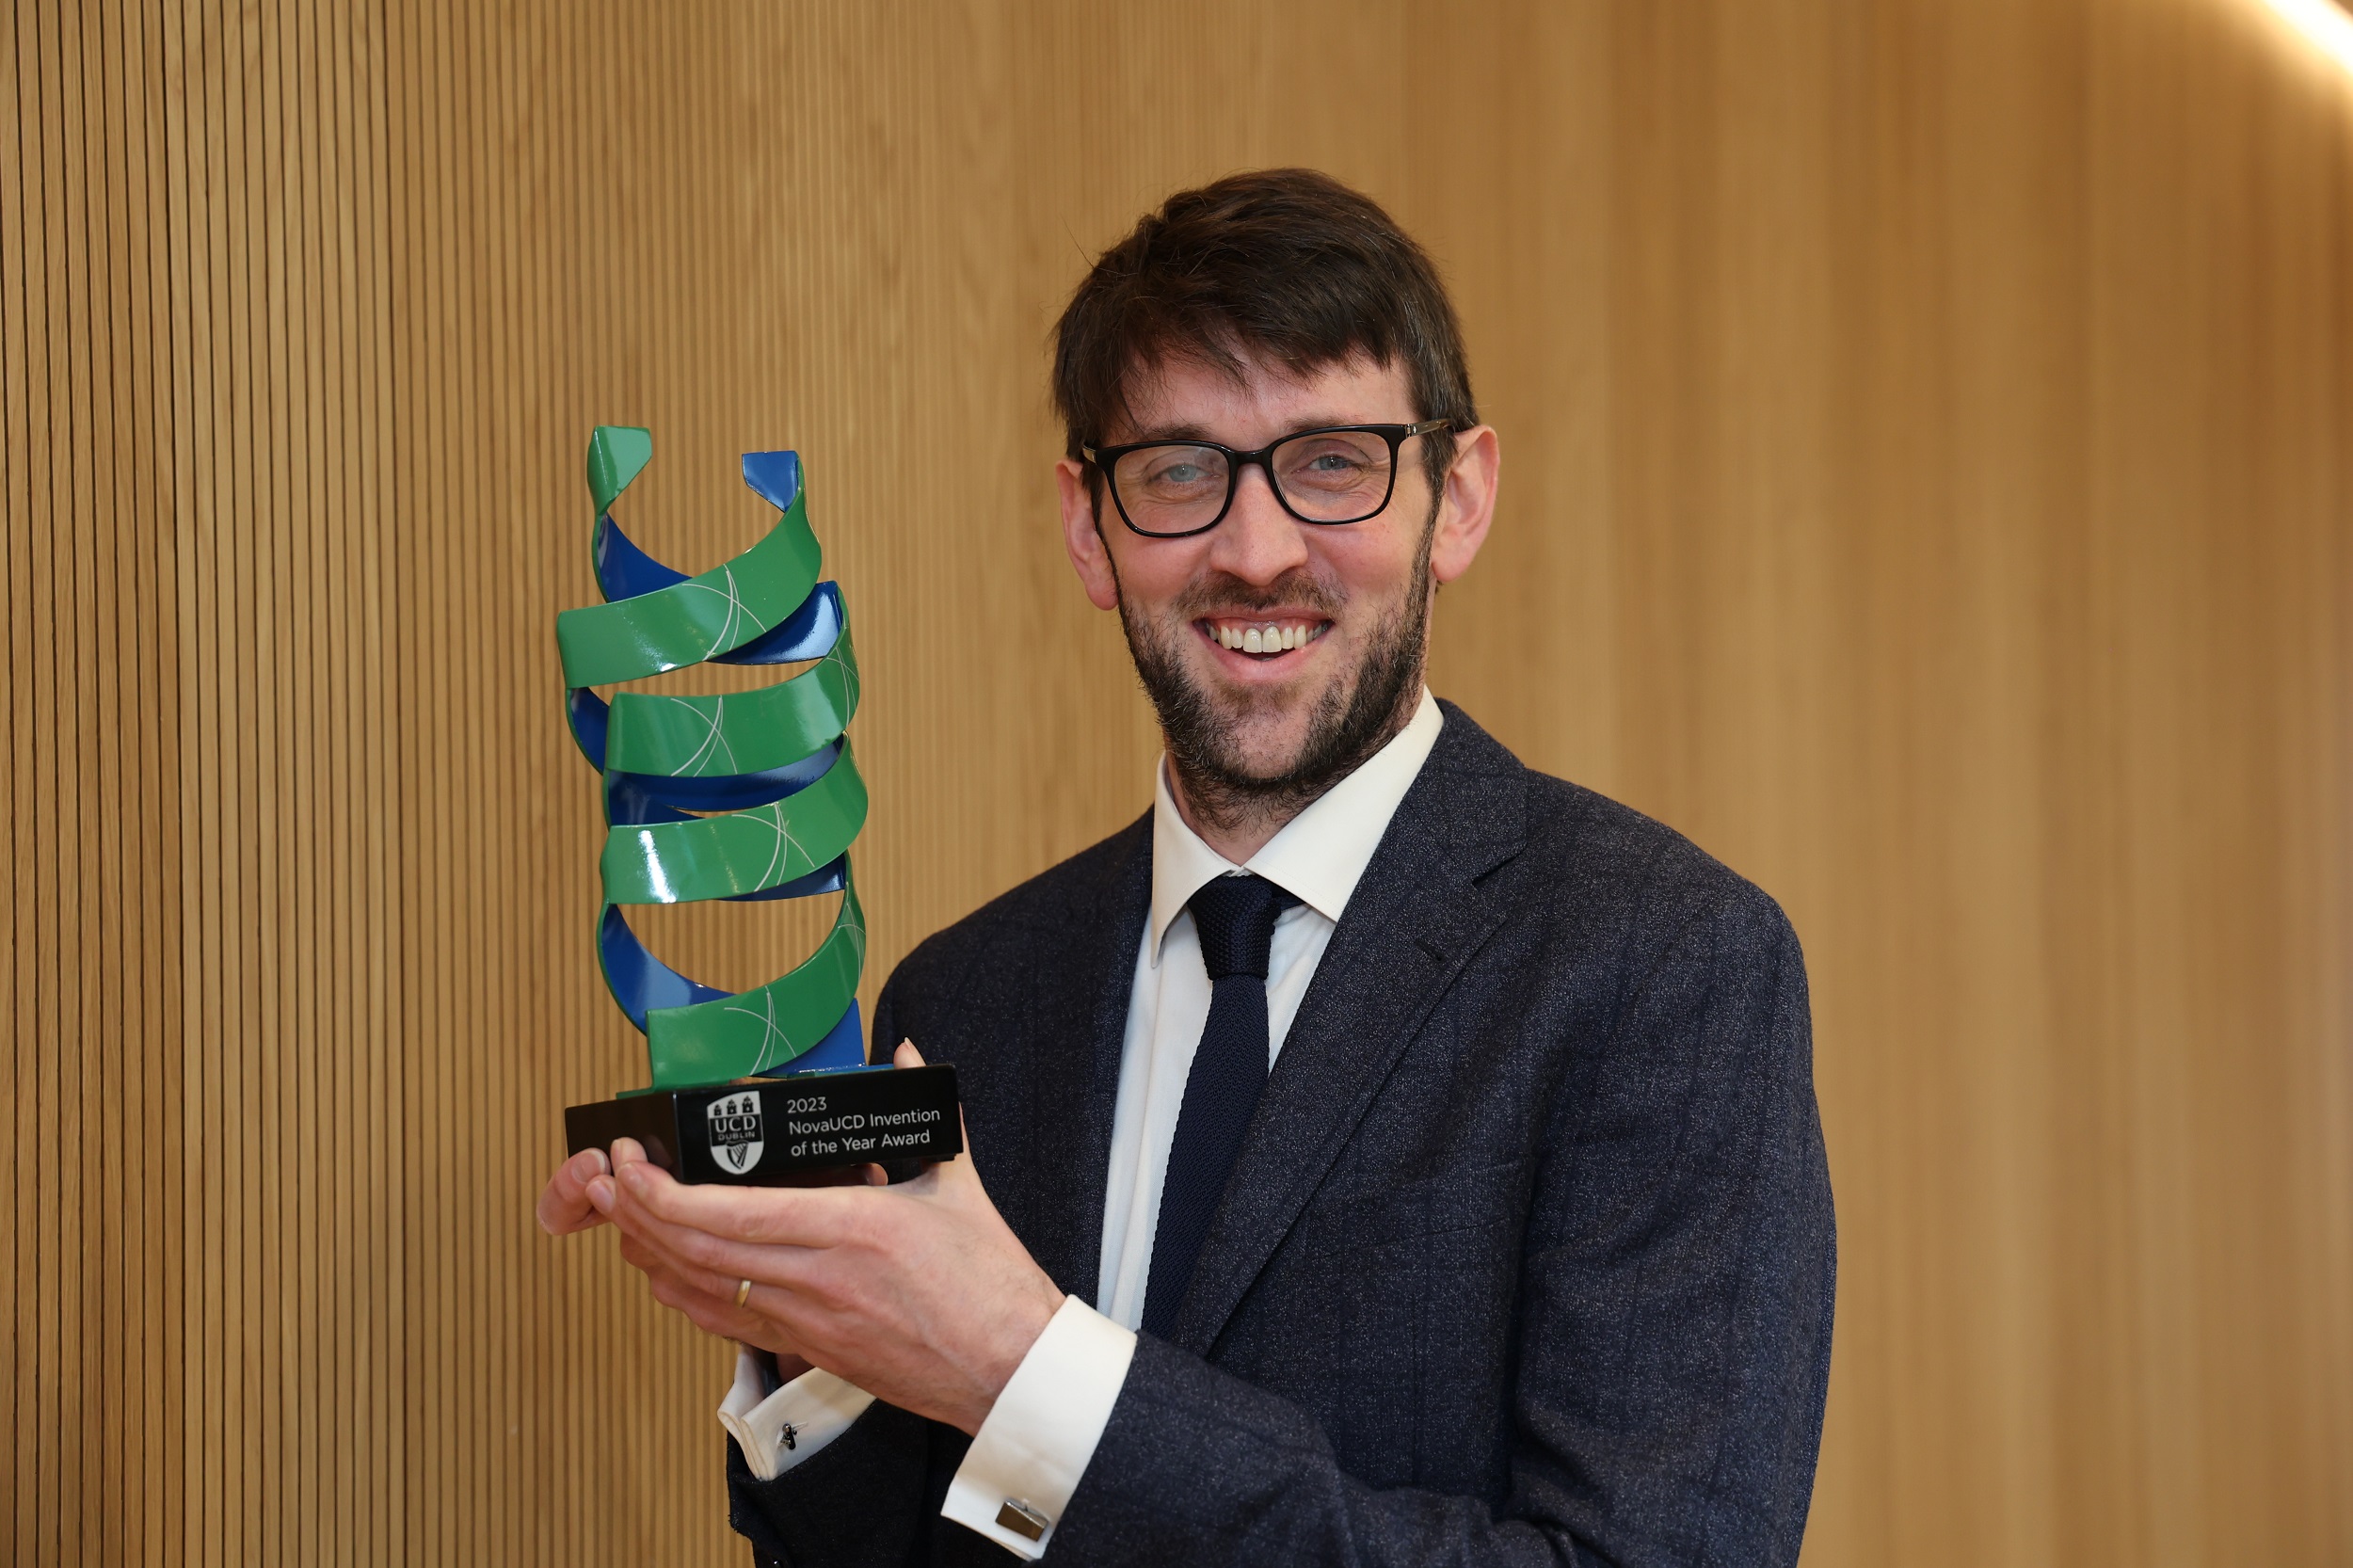 A man smiling and holding an award